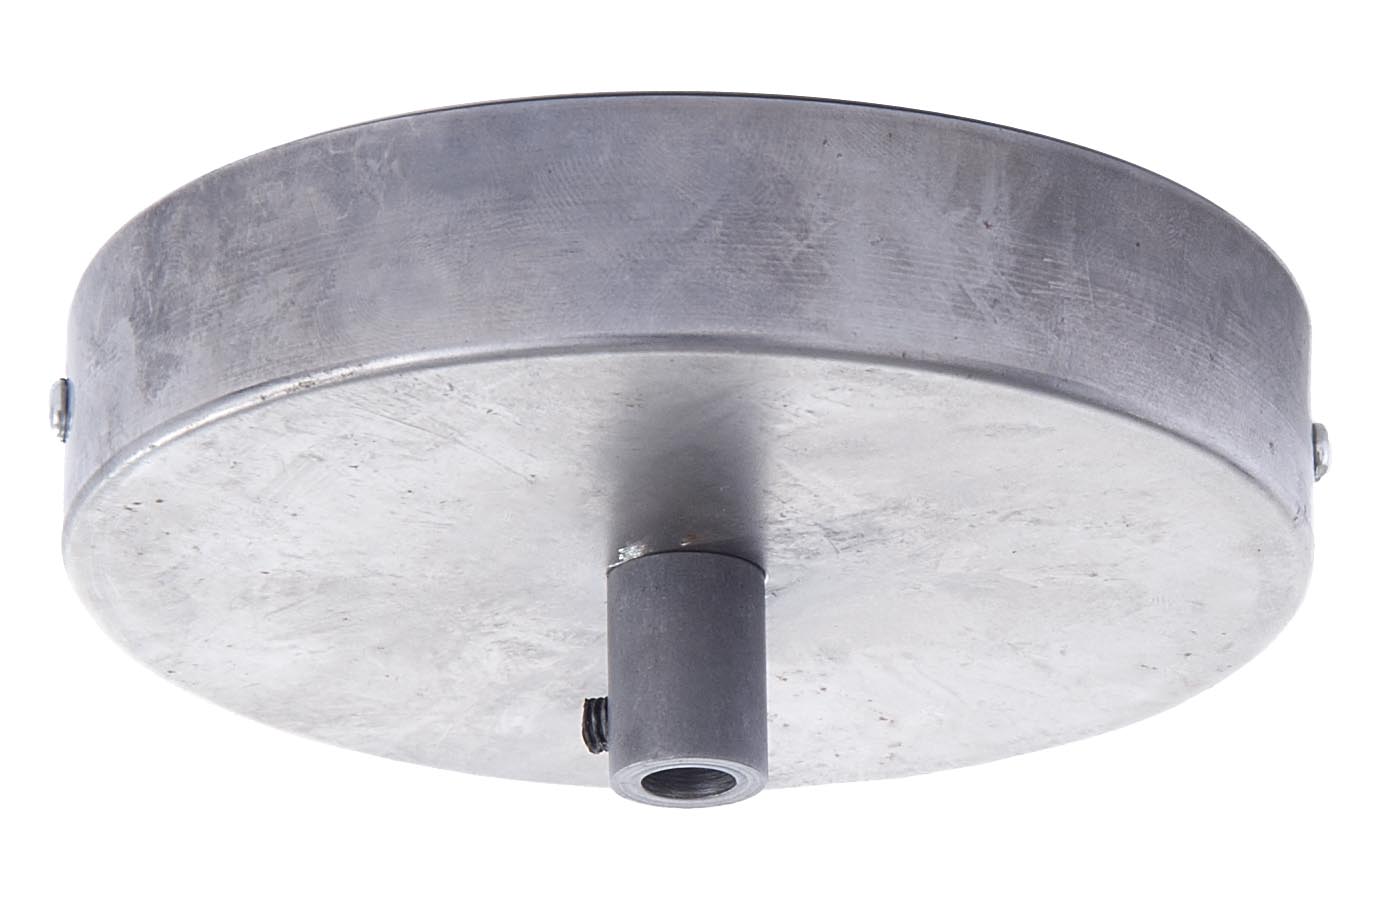 Single Port Lighting Fixture Canopy Kit in Unfinished Steel